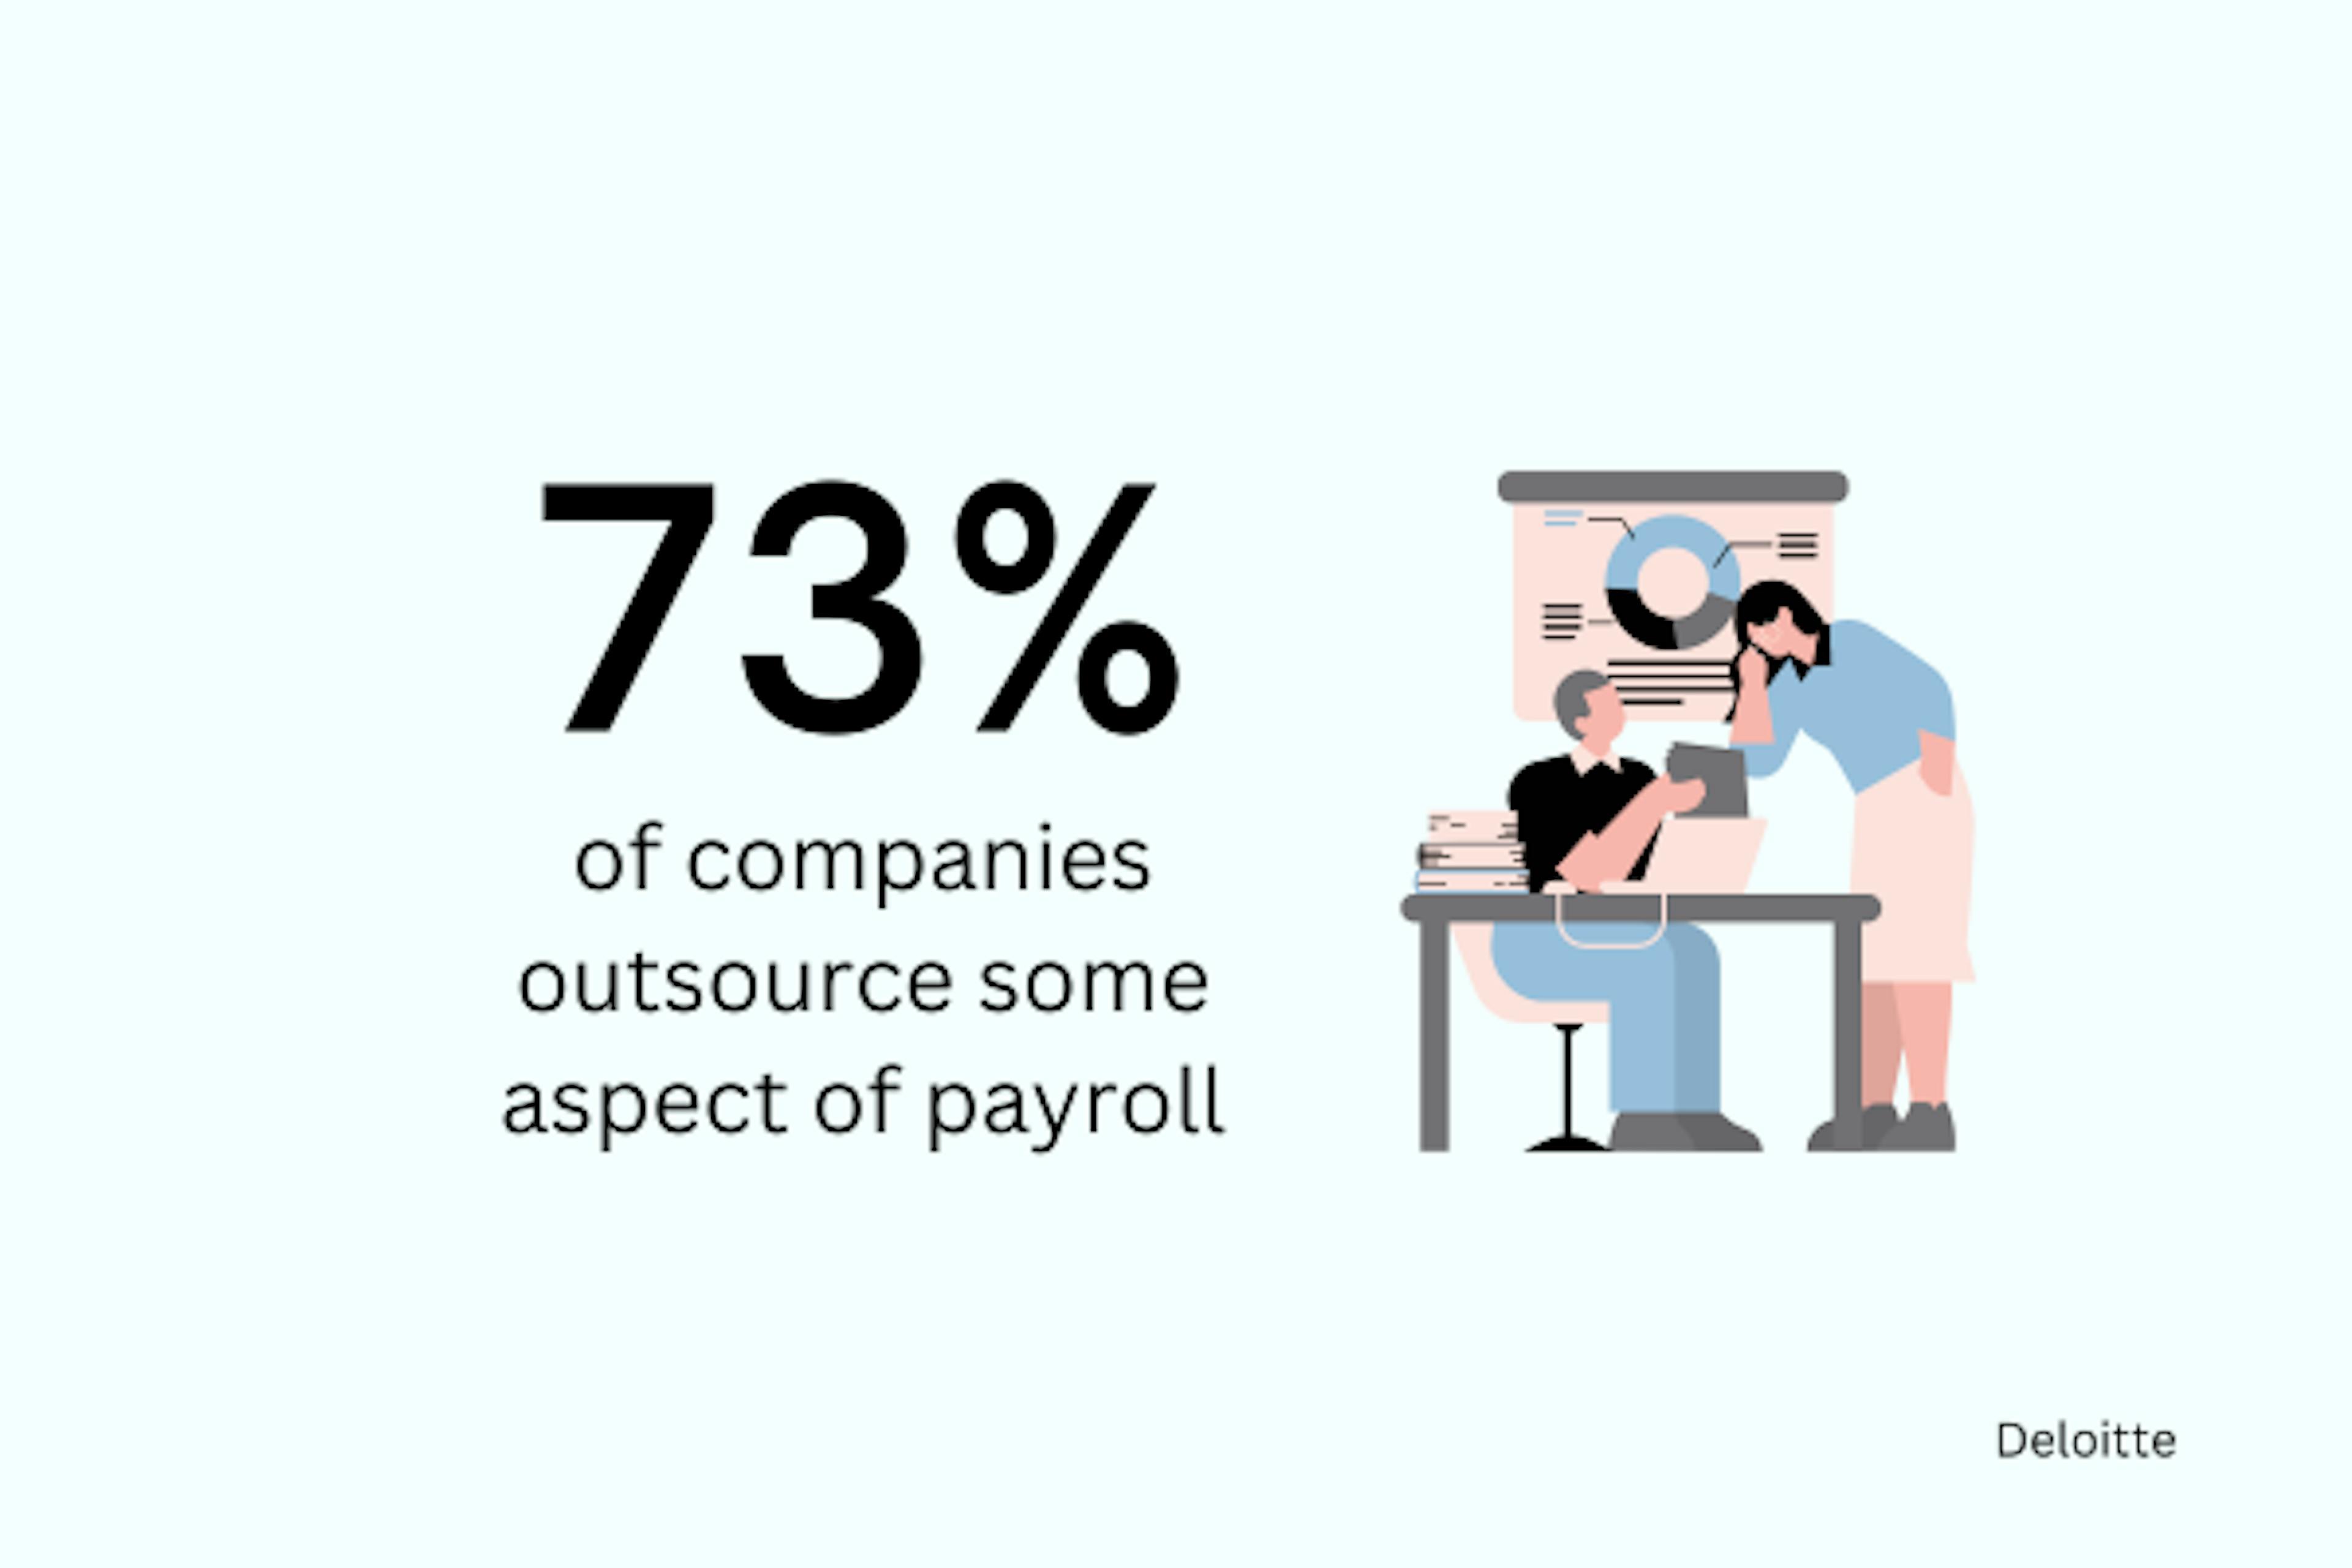 According to Deloitte, 73% of companies outsource some aspect of payroll. 